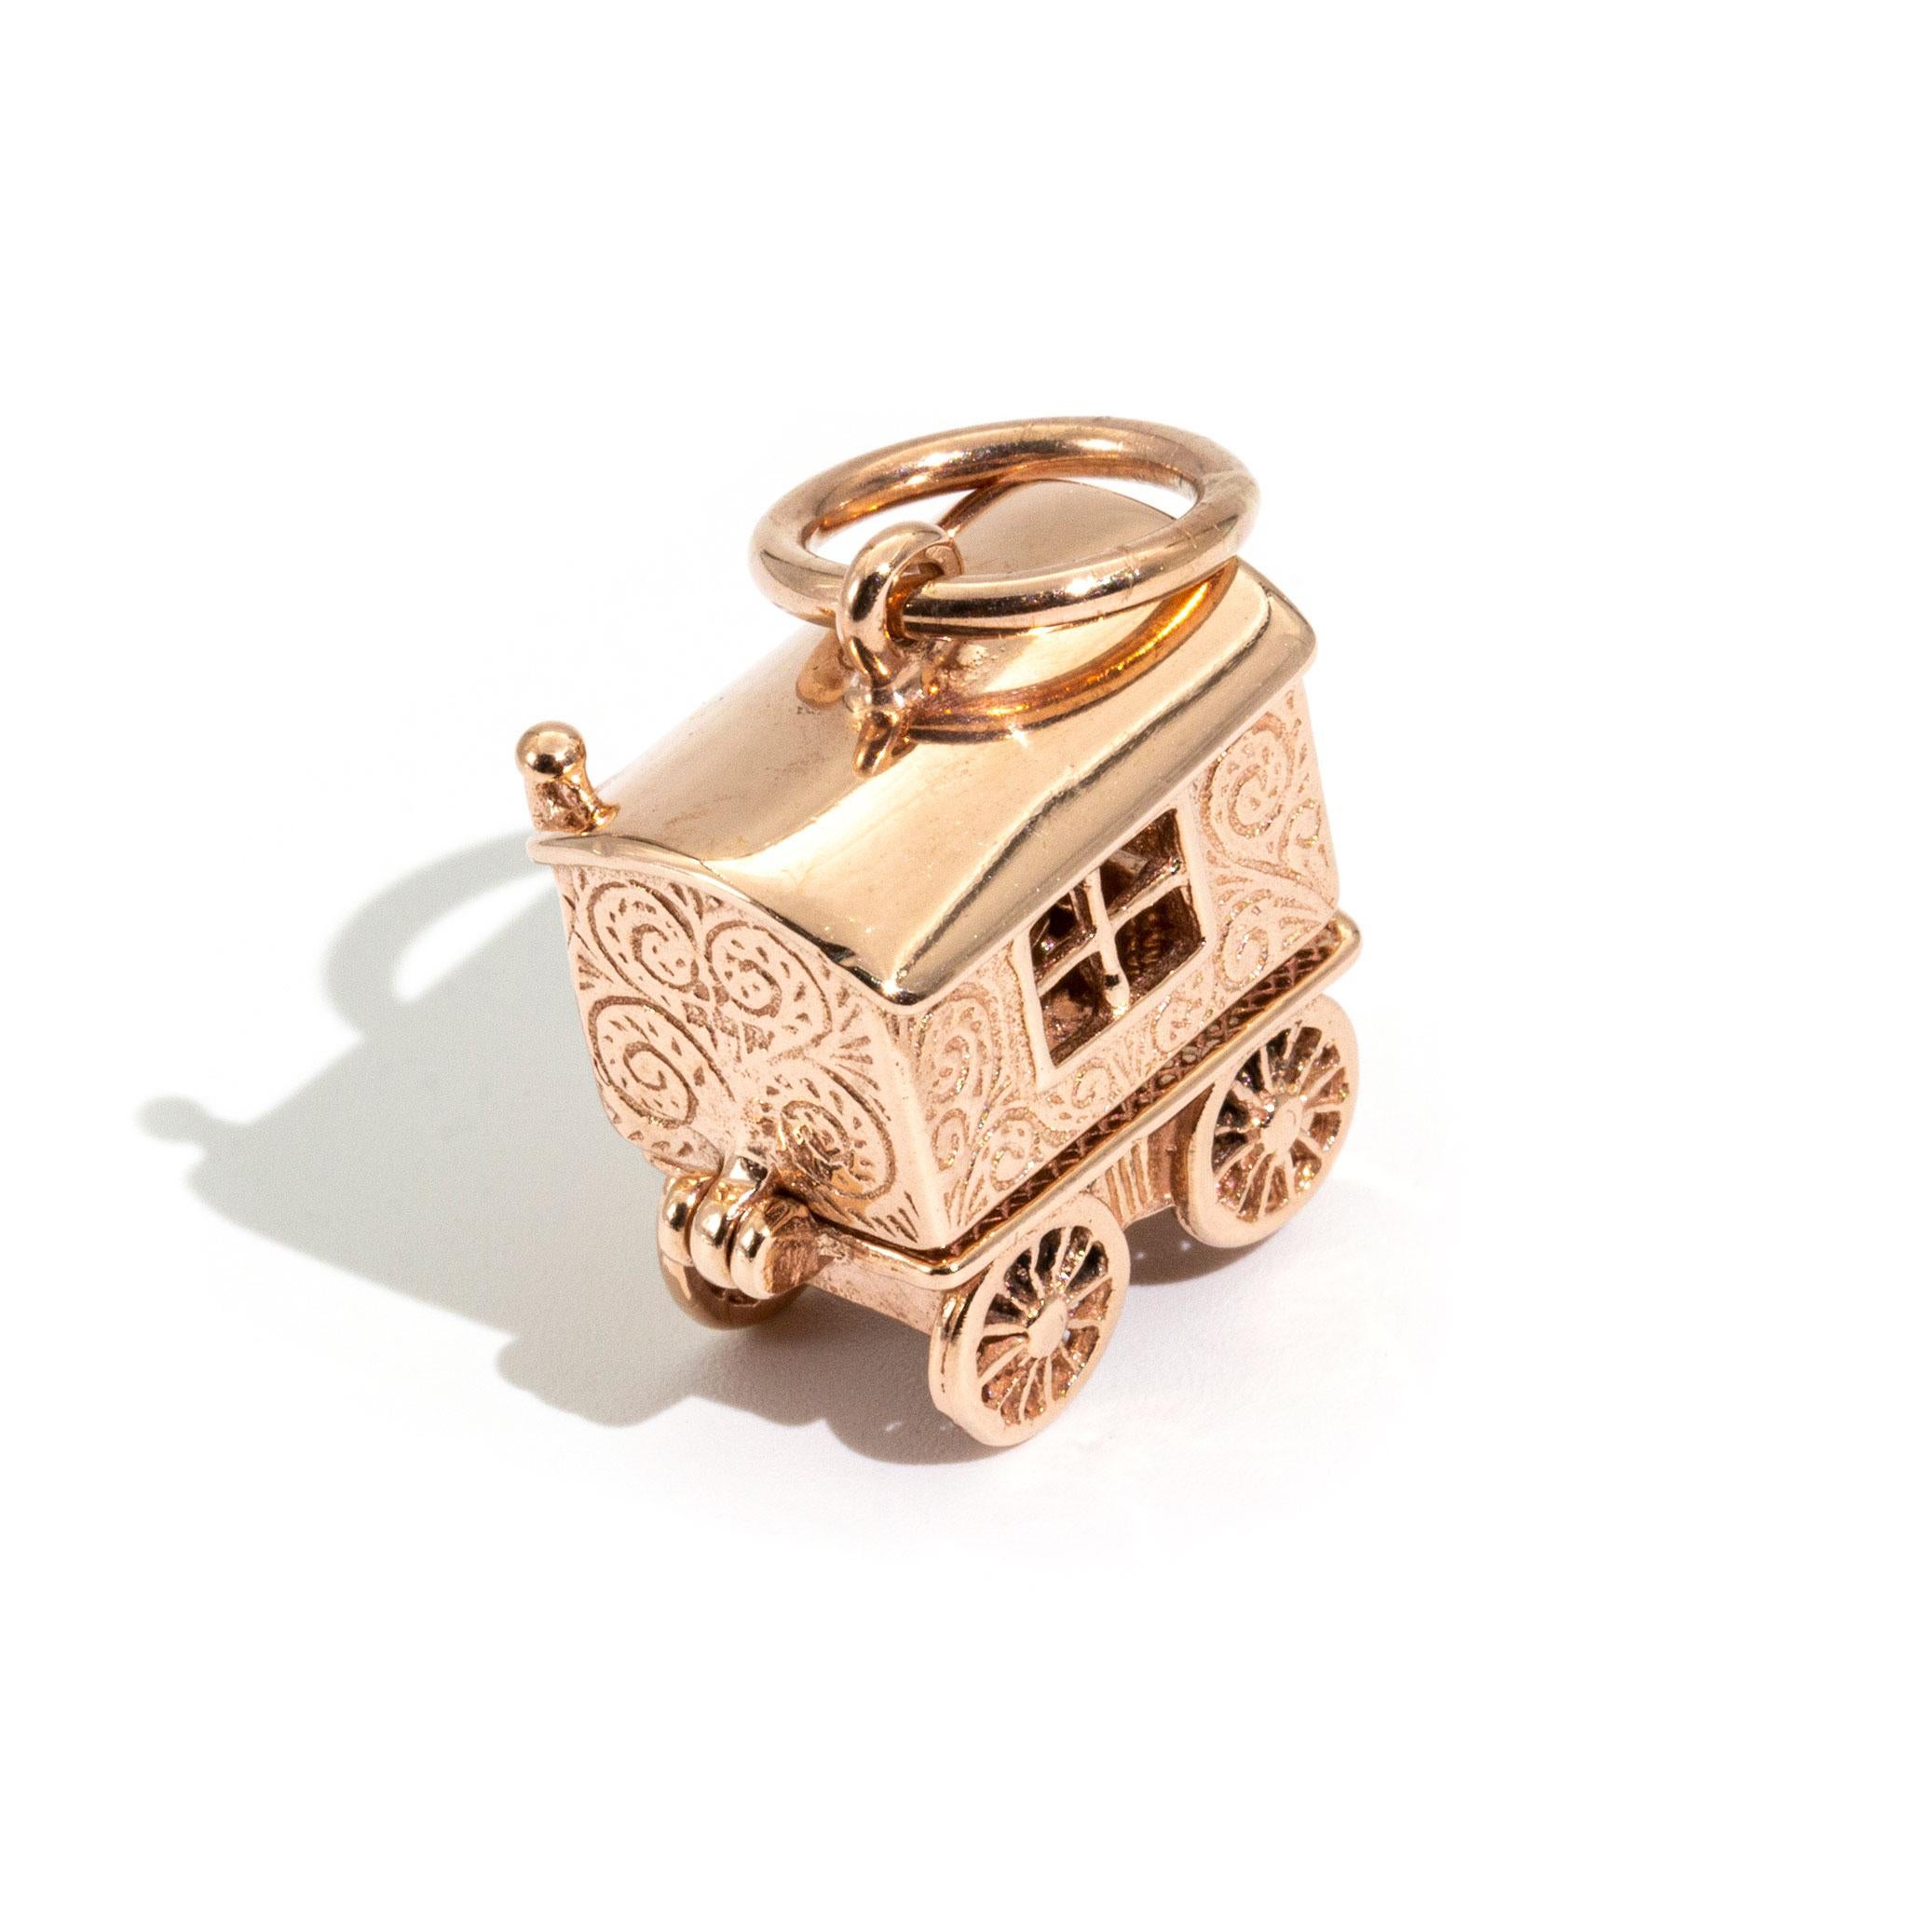 Crafted in 9 carat rose gold is this darling, hard to find, intricately designed vintage charm featuring a Gypsy carriage with a hinged top section that open up to reveal a clairvoyant  a sitting at a table looking into a crystal ball. This charm is